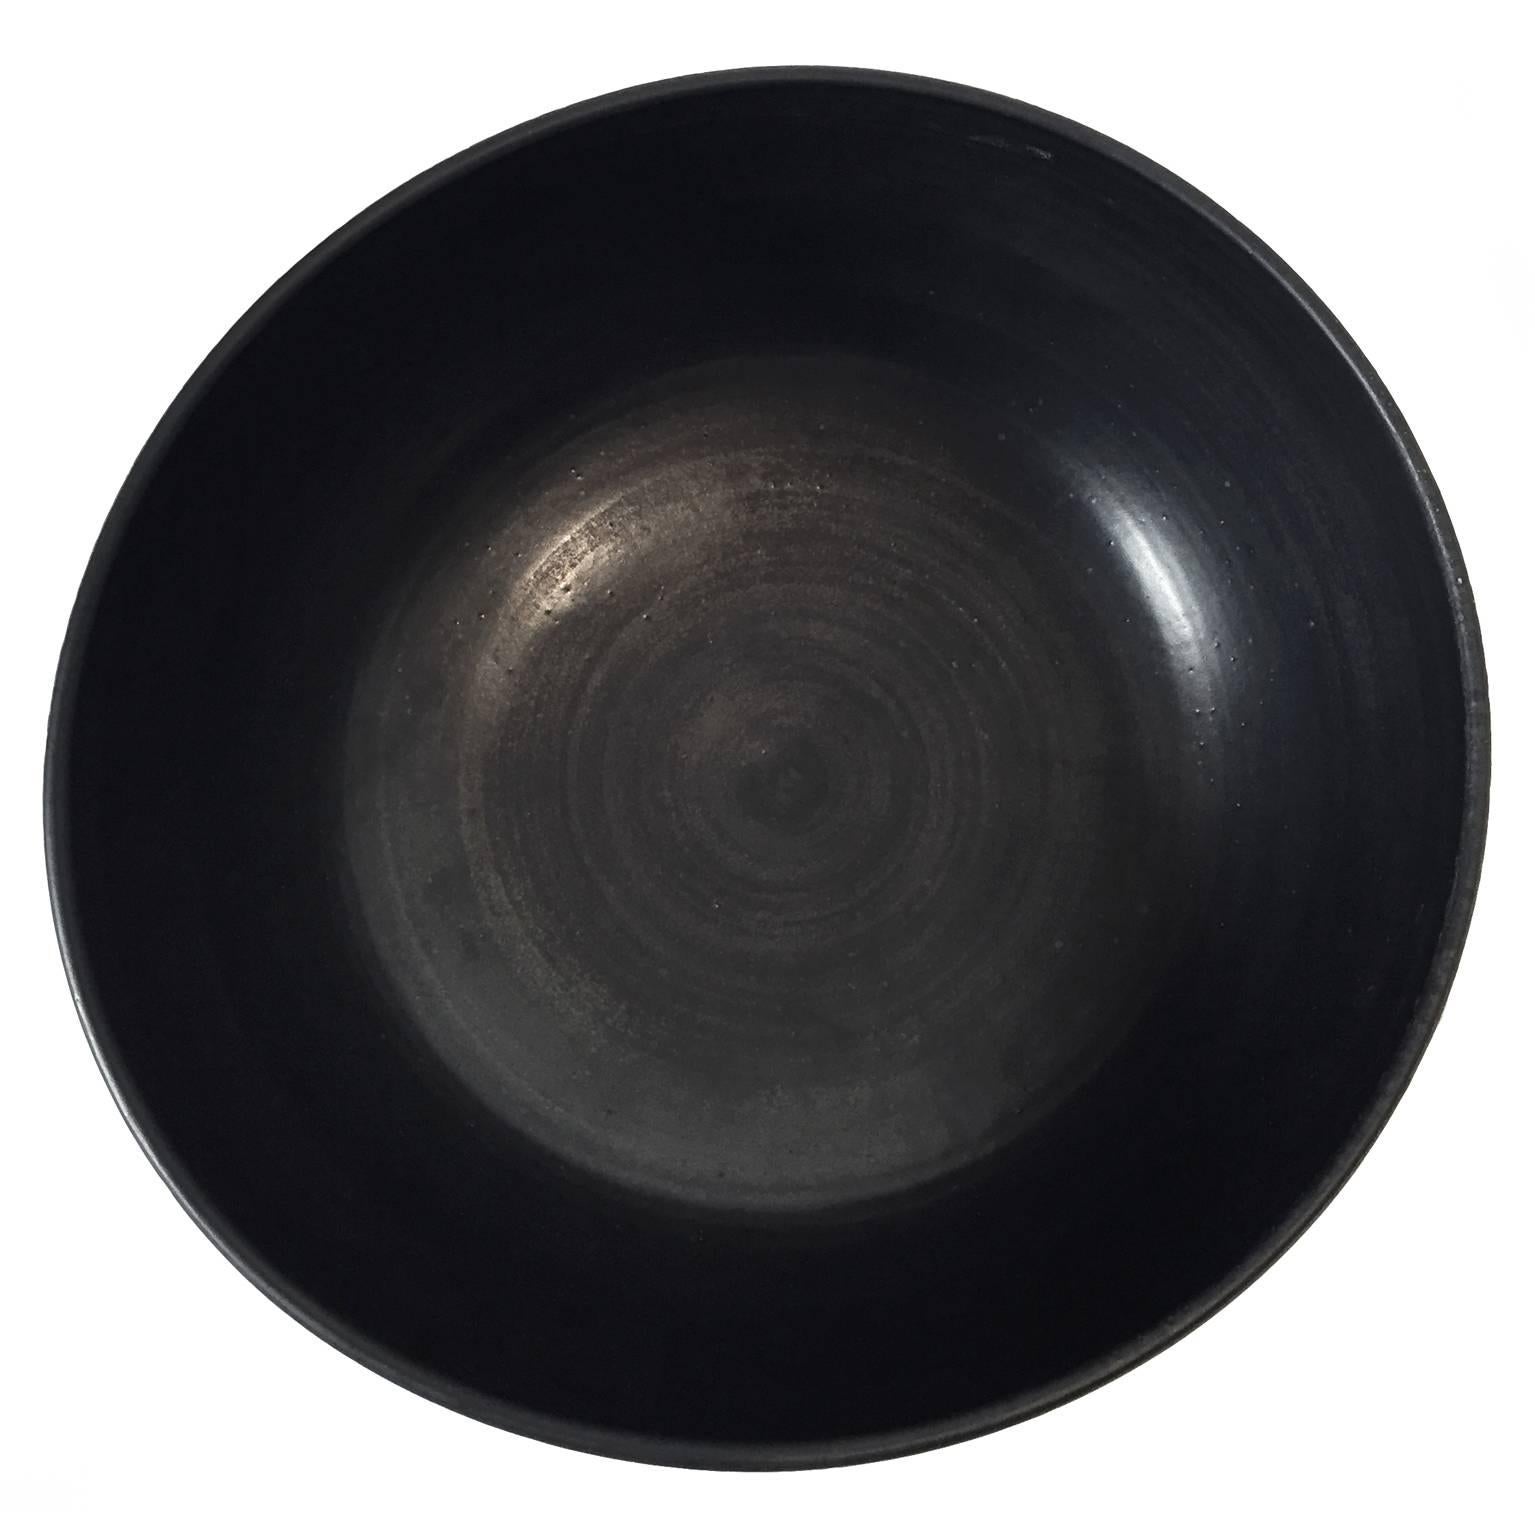 Curved ceramic bowl with black wax glaze exterior and black sheen glaze interior by Sandi Fellman, 2016.

Veteran photographer Sandi Fellman's ceramic vessels are an exploration of a new medium. The forms, palettes, and sensuality of her photos